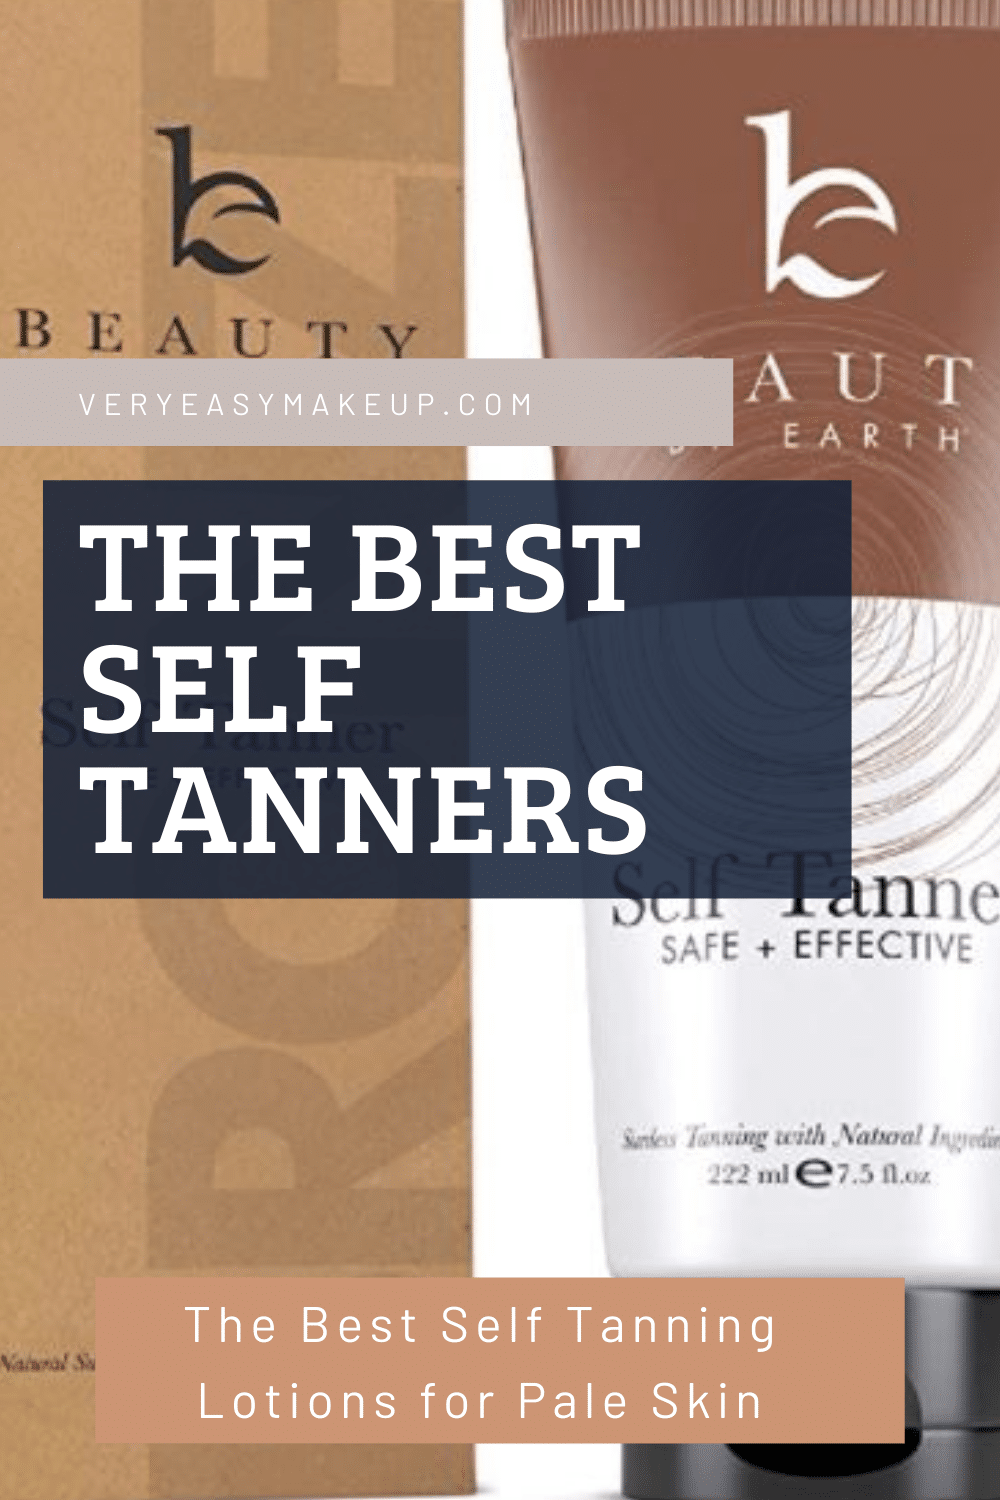 best self tanners for pale skin 2021 by Very Easy Makeup